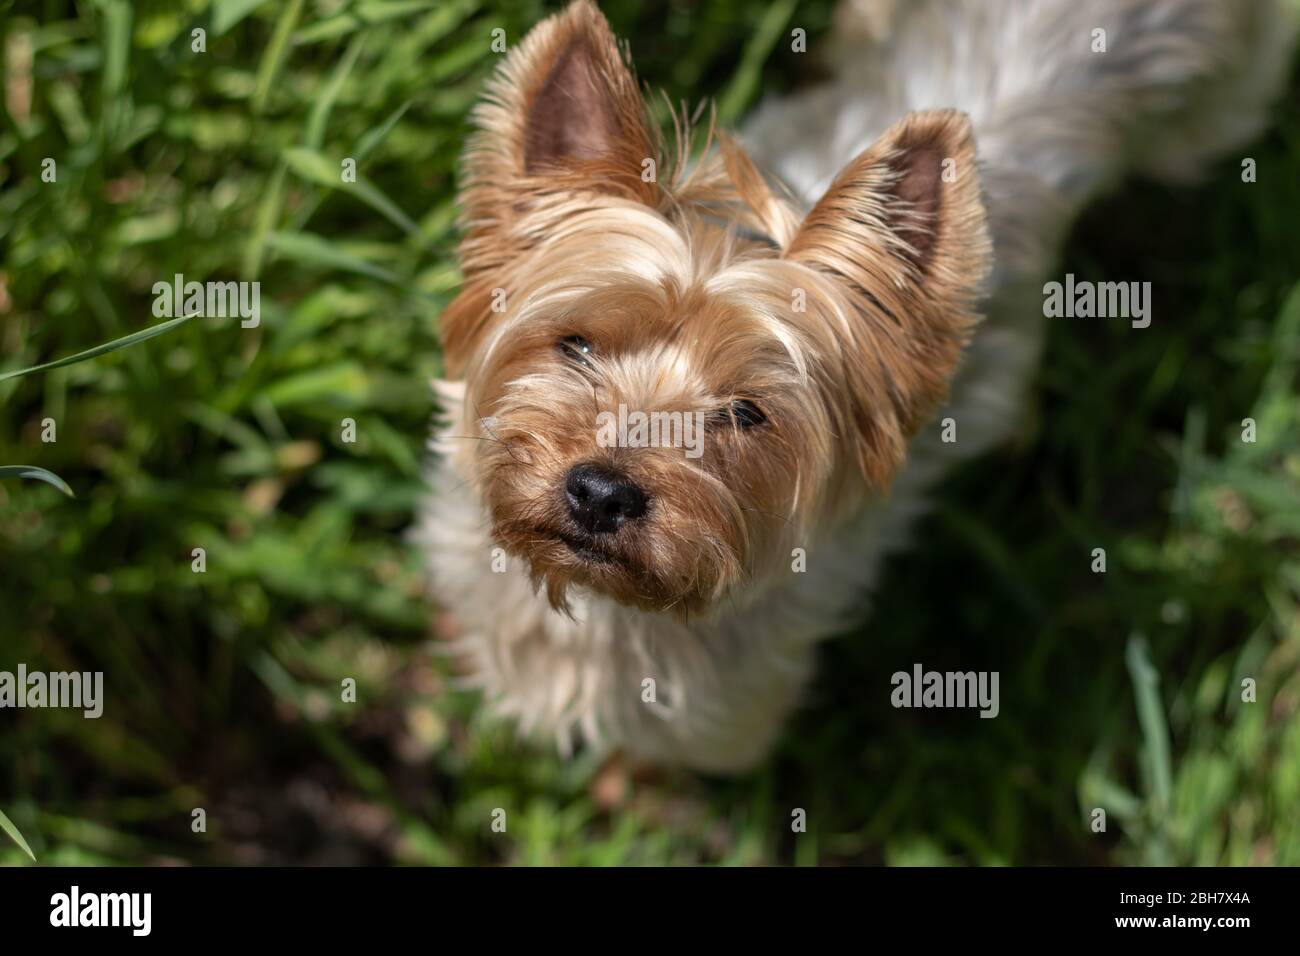 Small yorkshire terrier dog looking at camera from the grass. Stock Photo